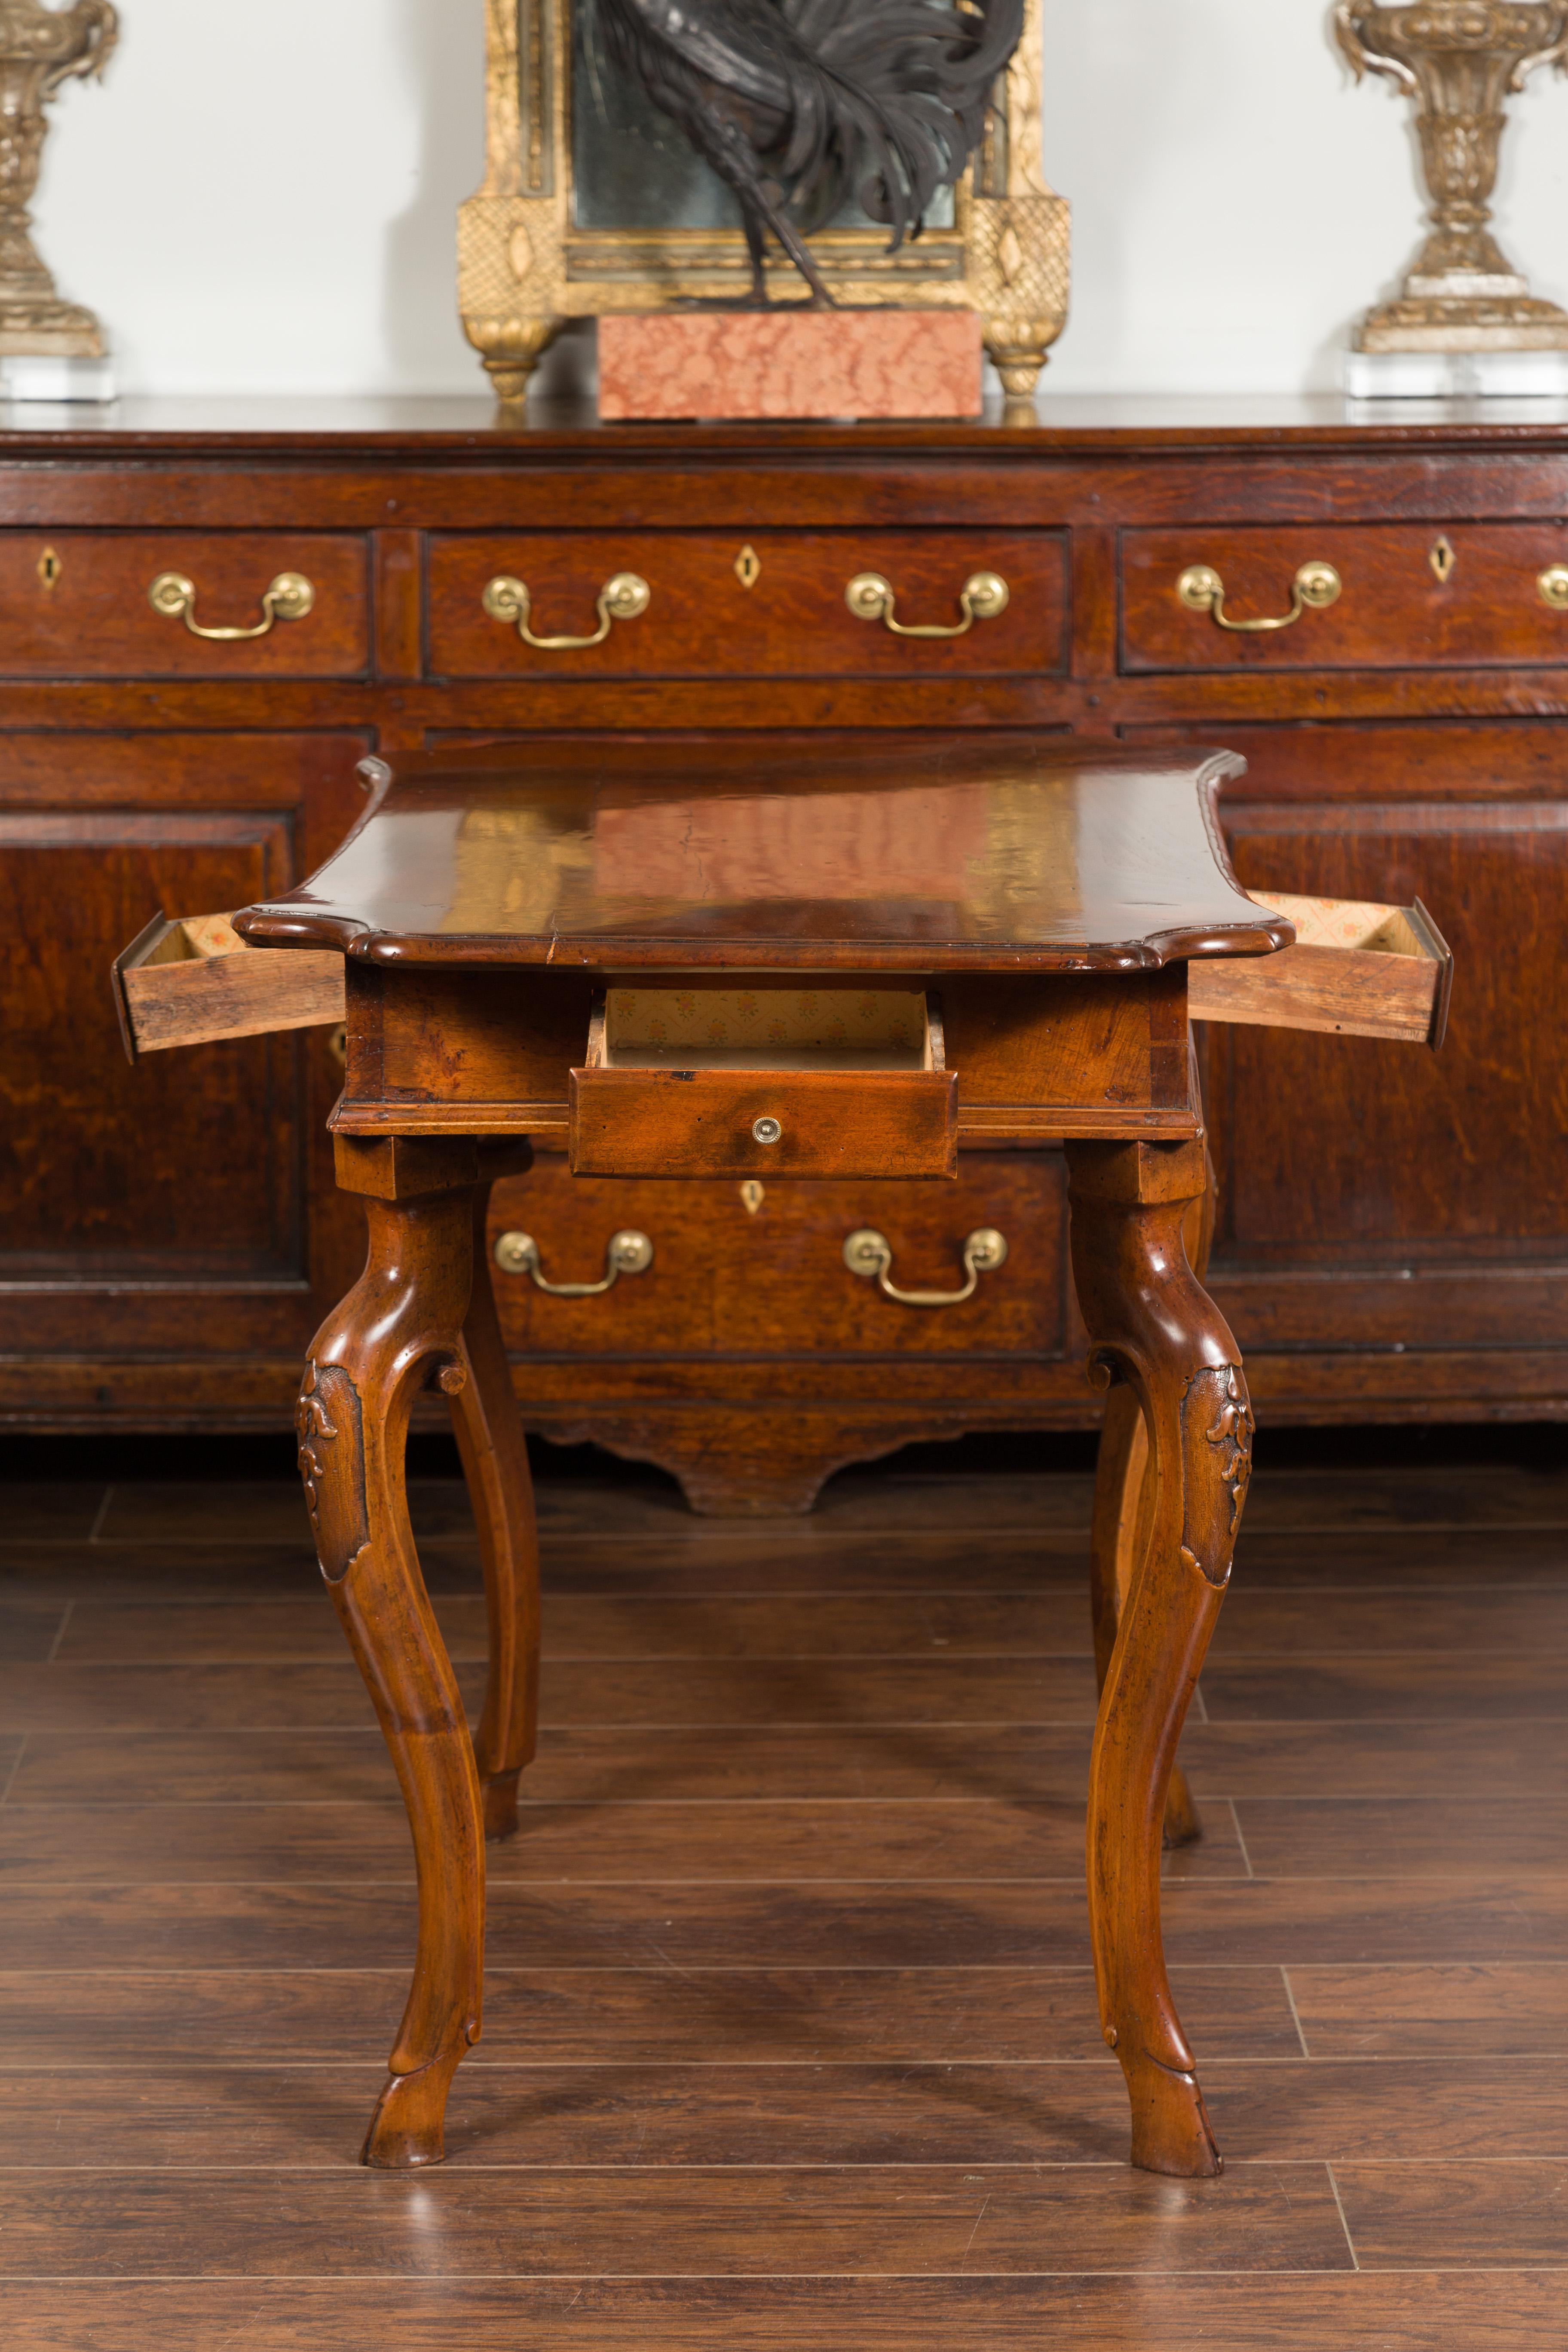 Northern Italian 1720s Régence Walnut Side Table with Four Drawers and Cabrioles 8